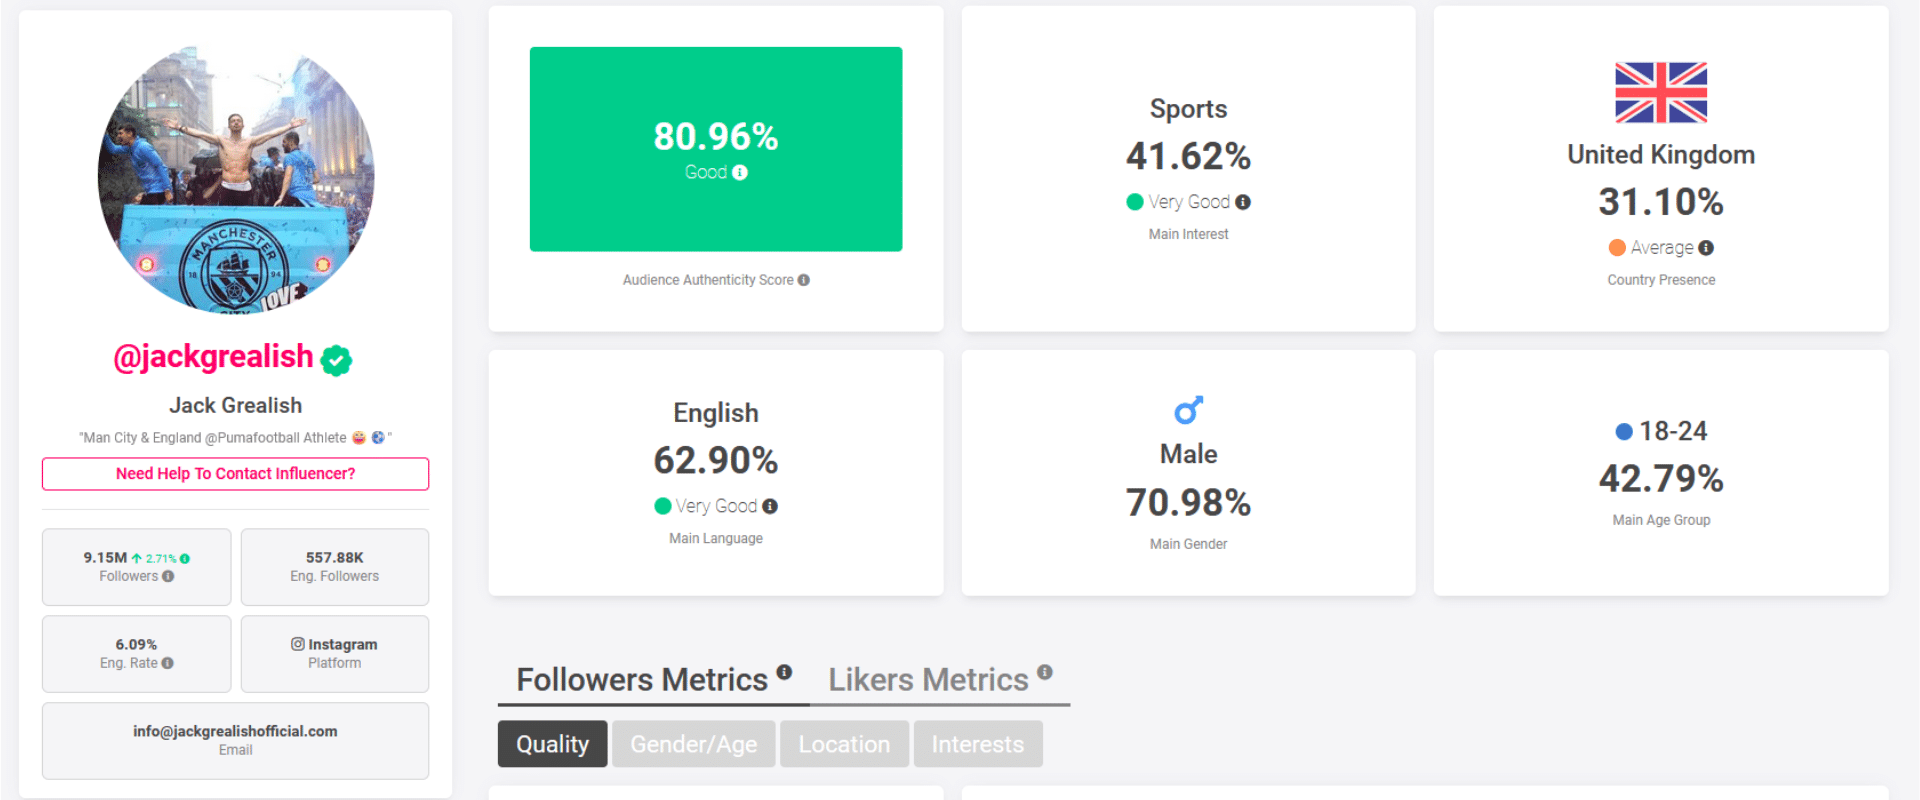 Dashboard displaying data for a user named @jackgrealish, including follower authenticity score, demographic stats, and engagement metrics with representations in graphs and percentage values.